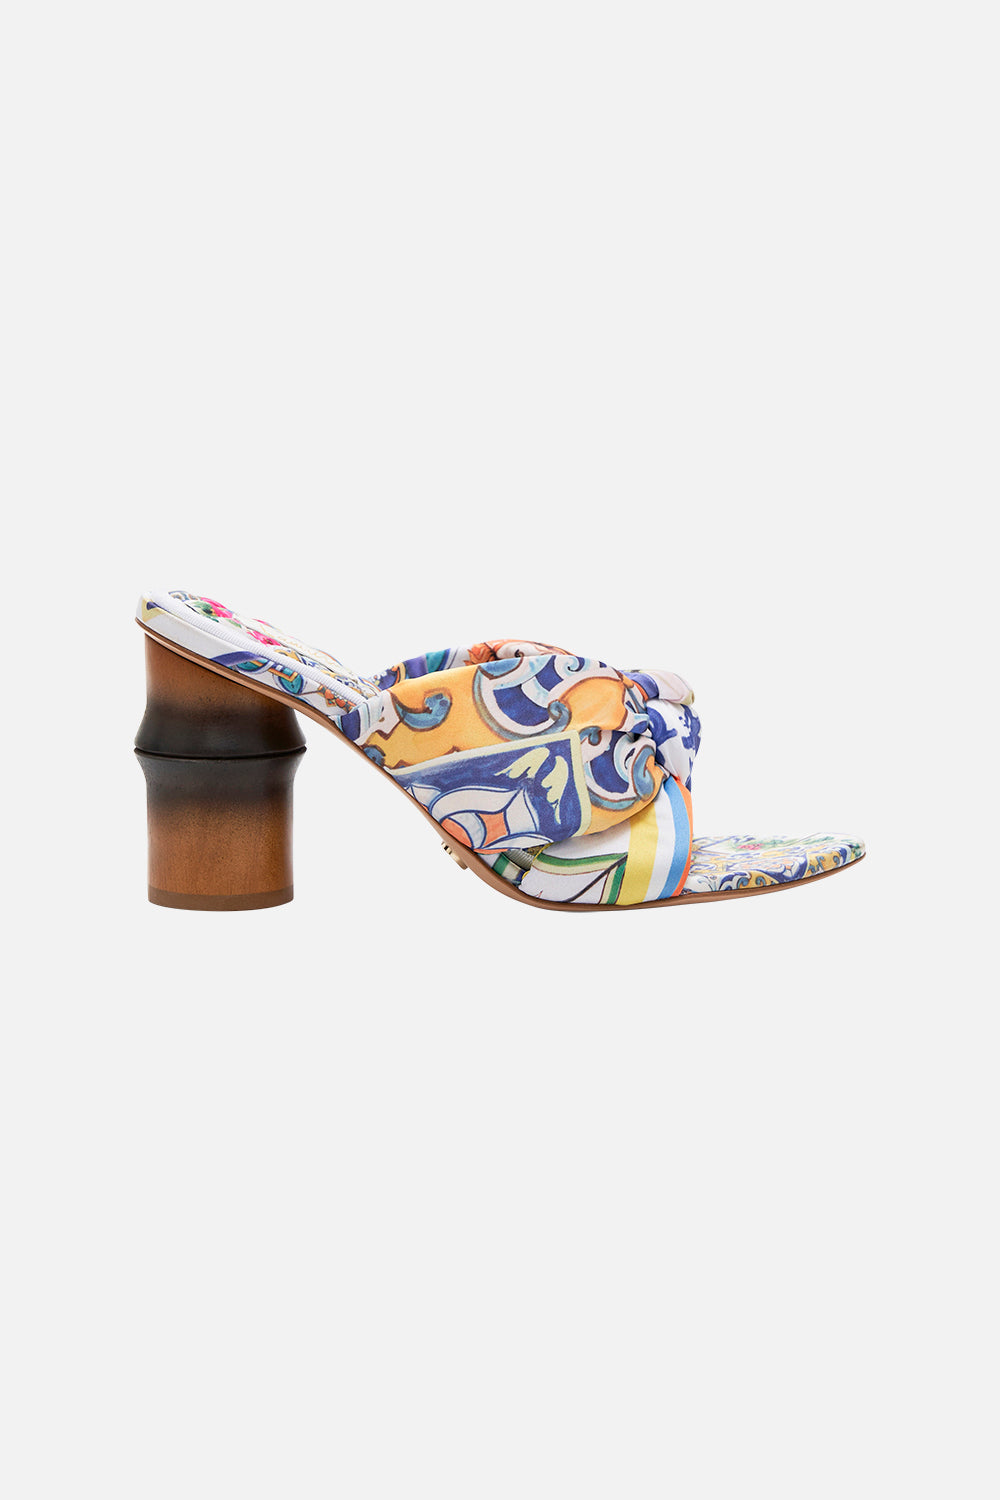 Product view of CAMILLA knotted heel in Amalfi Amore print